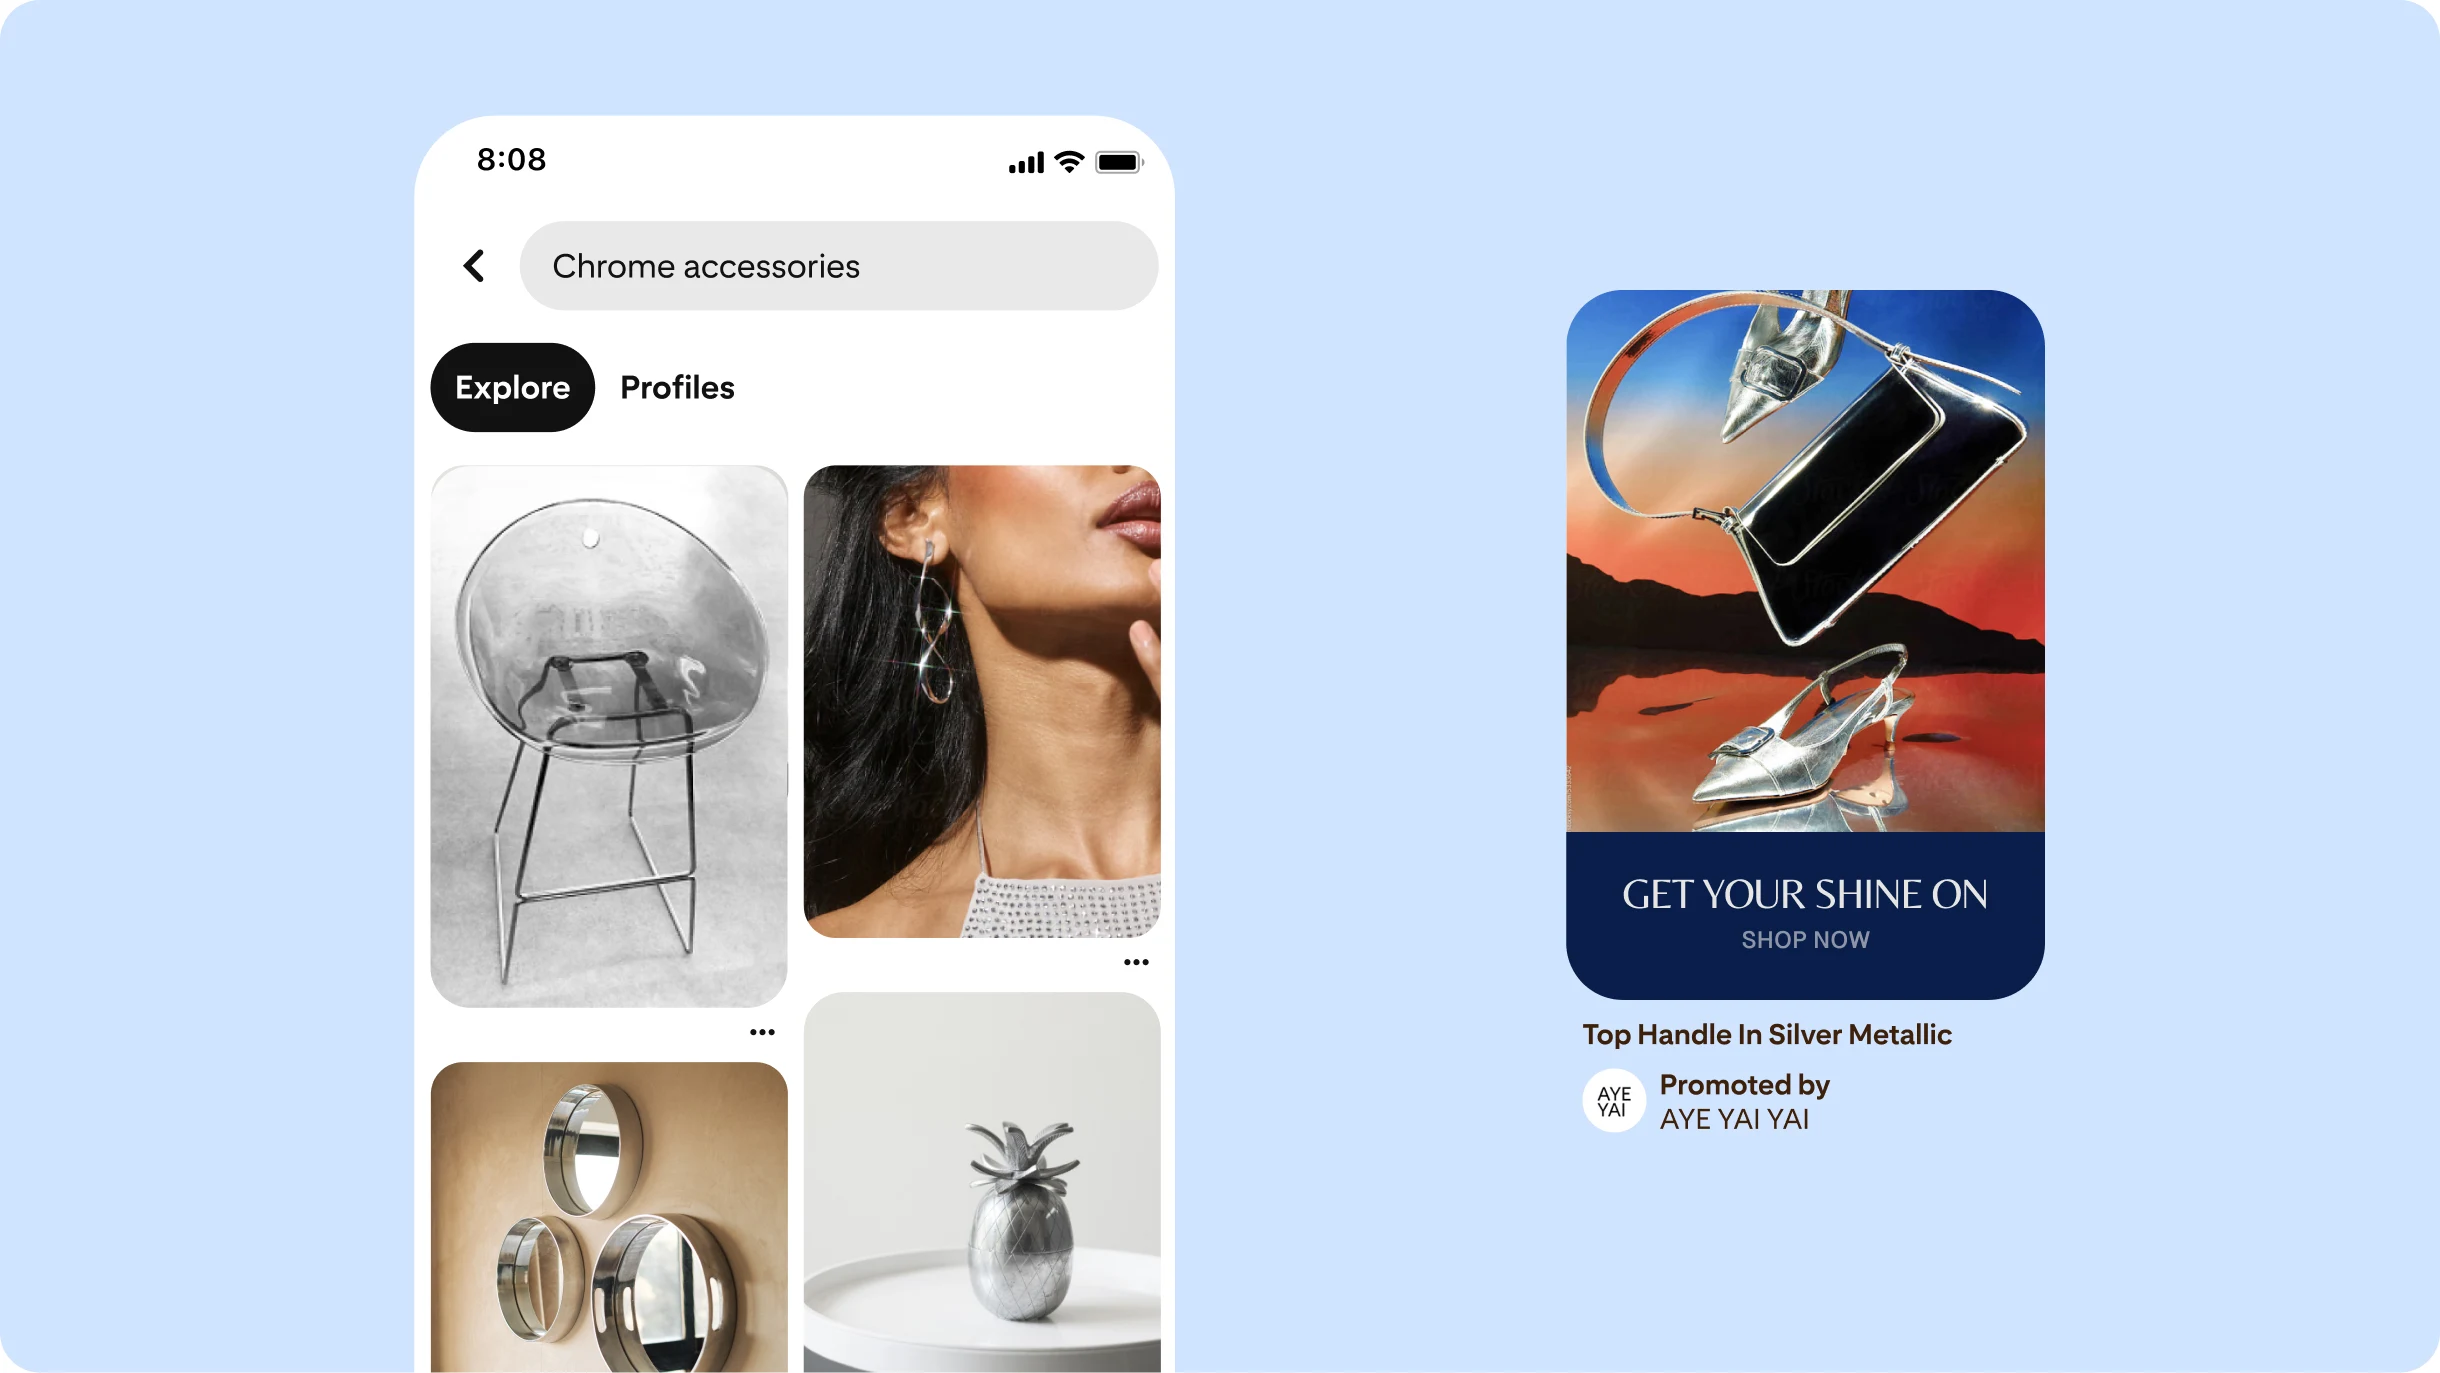 An image of the Pinterest home feed with “Chrome accessories” written in the search bar appears at left, with several Pins below featuring chrome accessories and furniture. At right, a Pin-shaped ad reads “Get your shine on.”